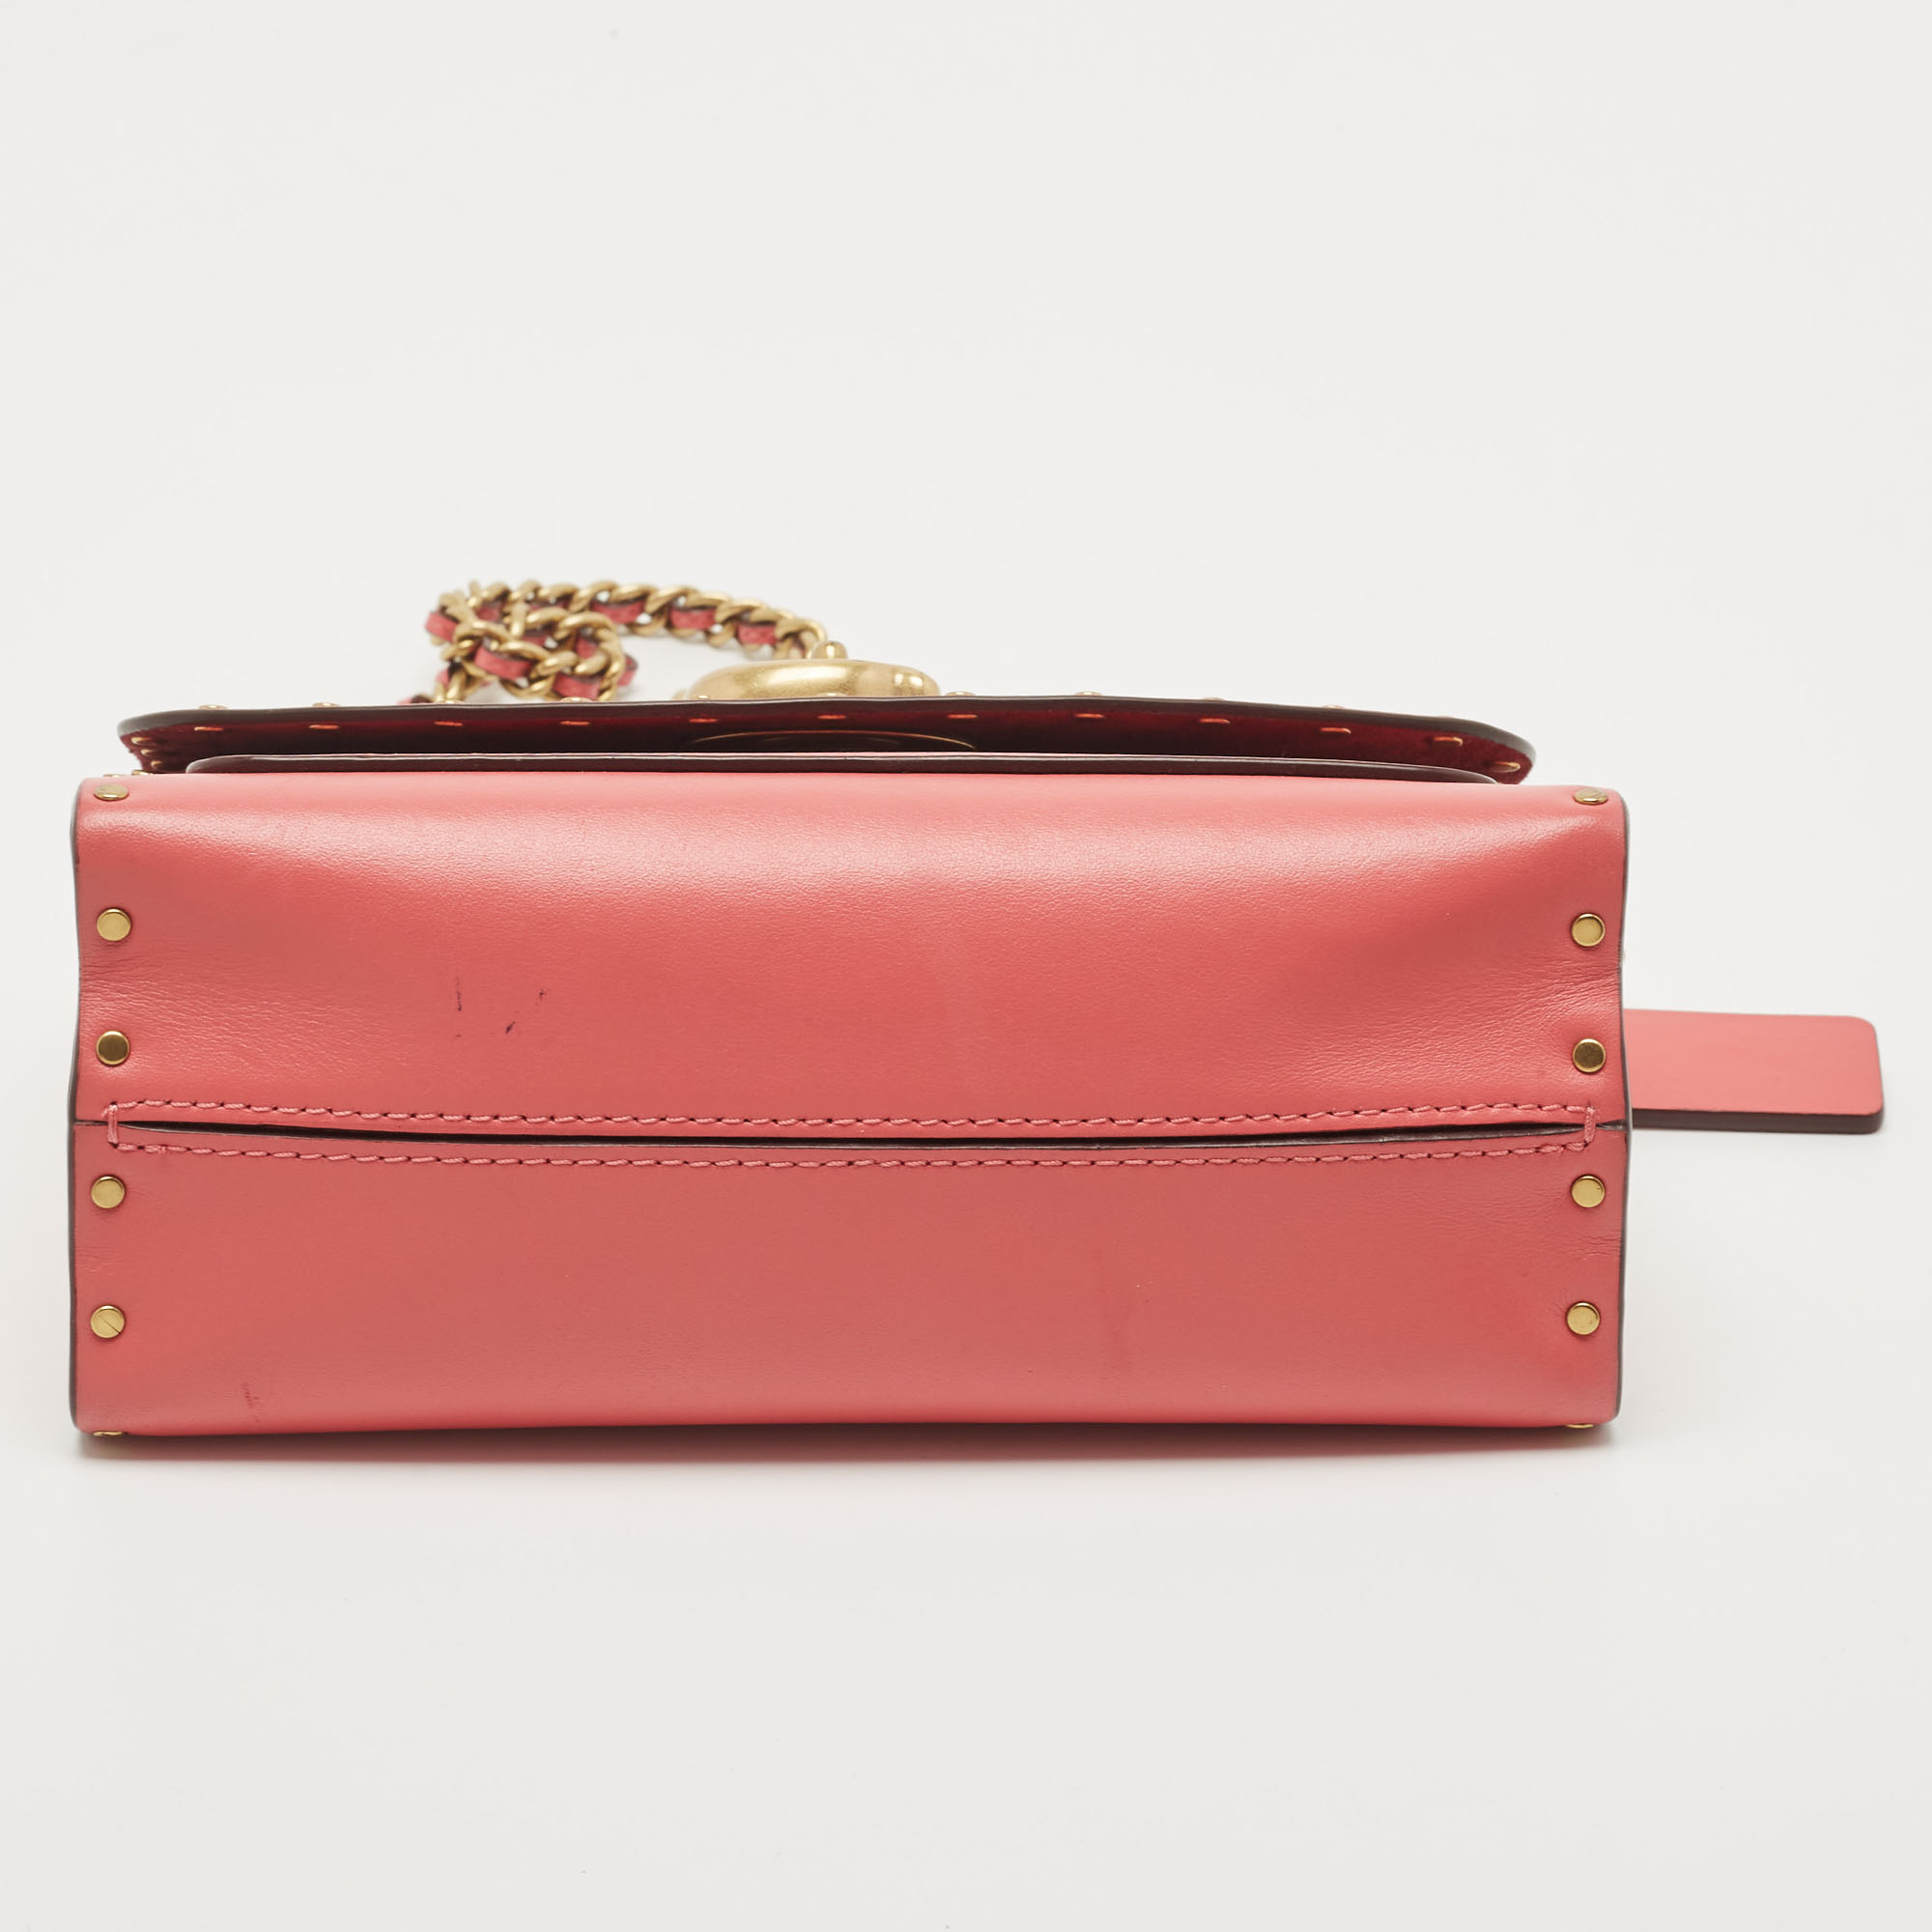 Coach Pink Leather Parker Crossbody Bag